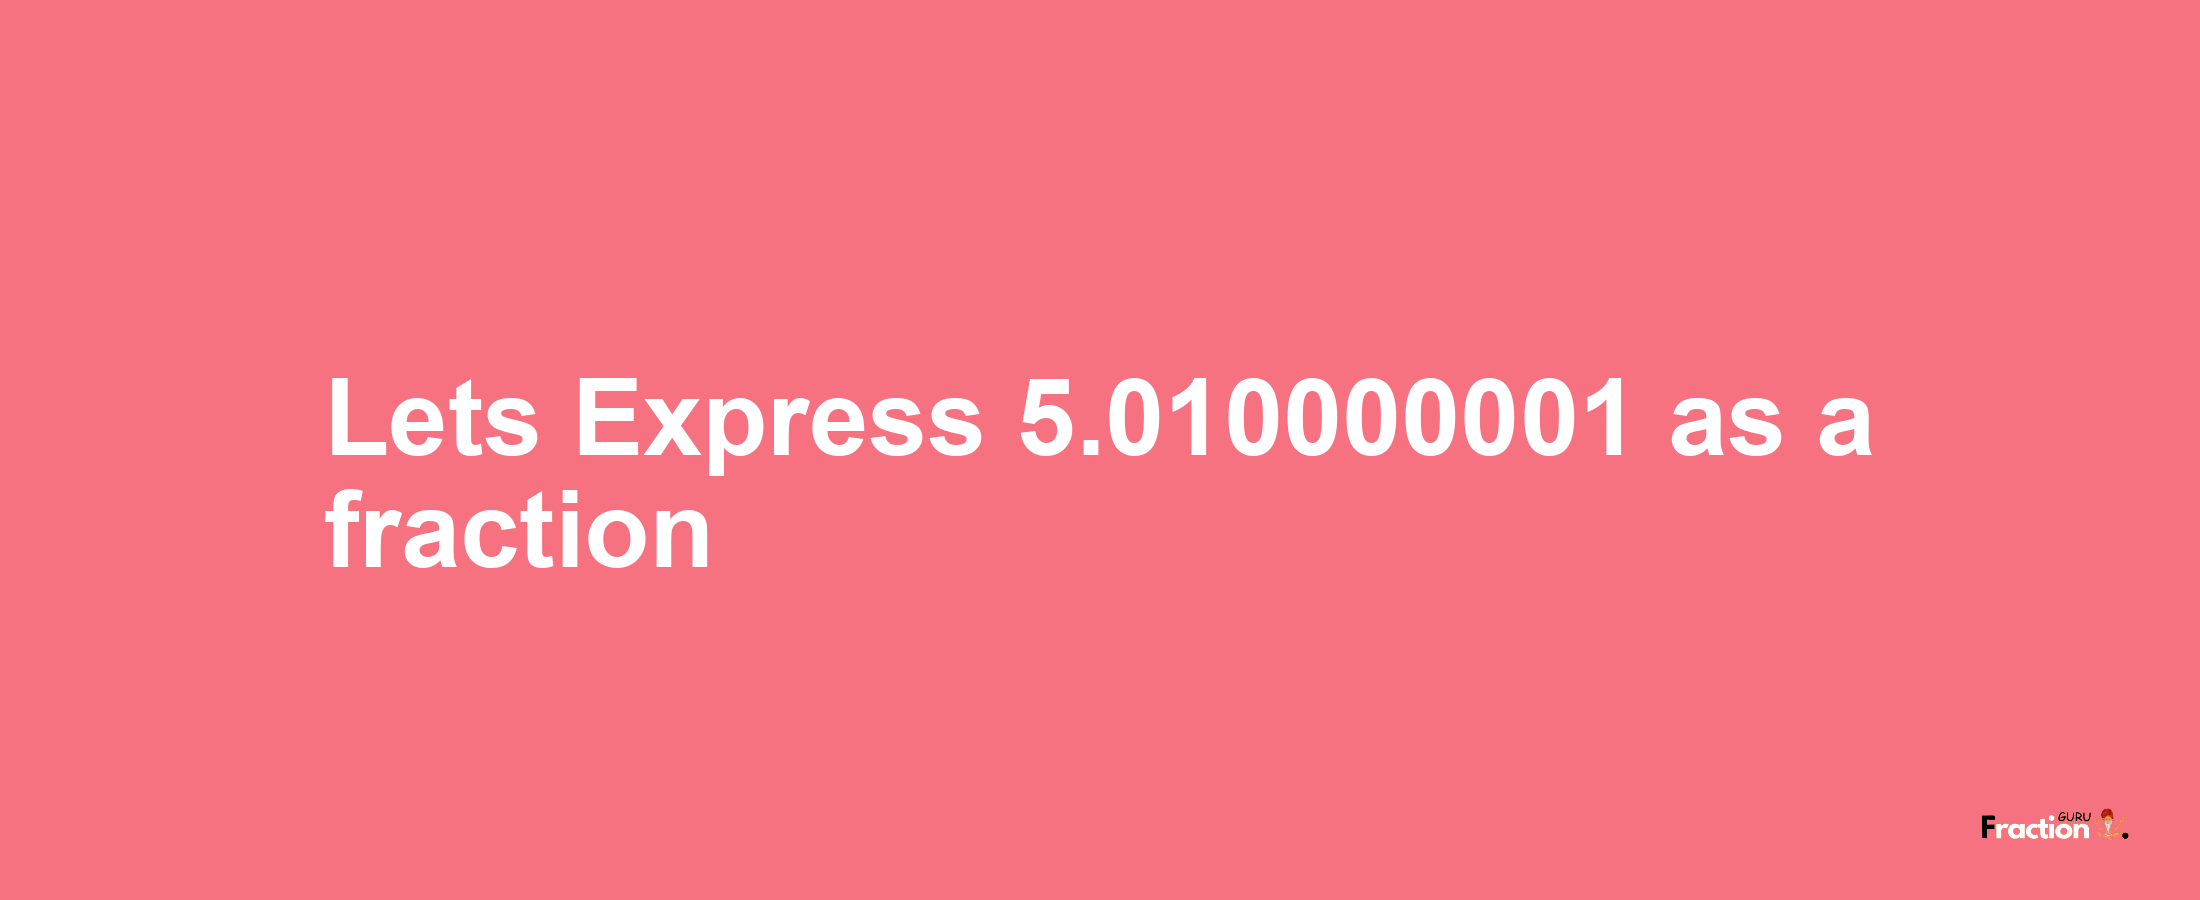 Lets Express 5.010000001 as afraction